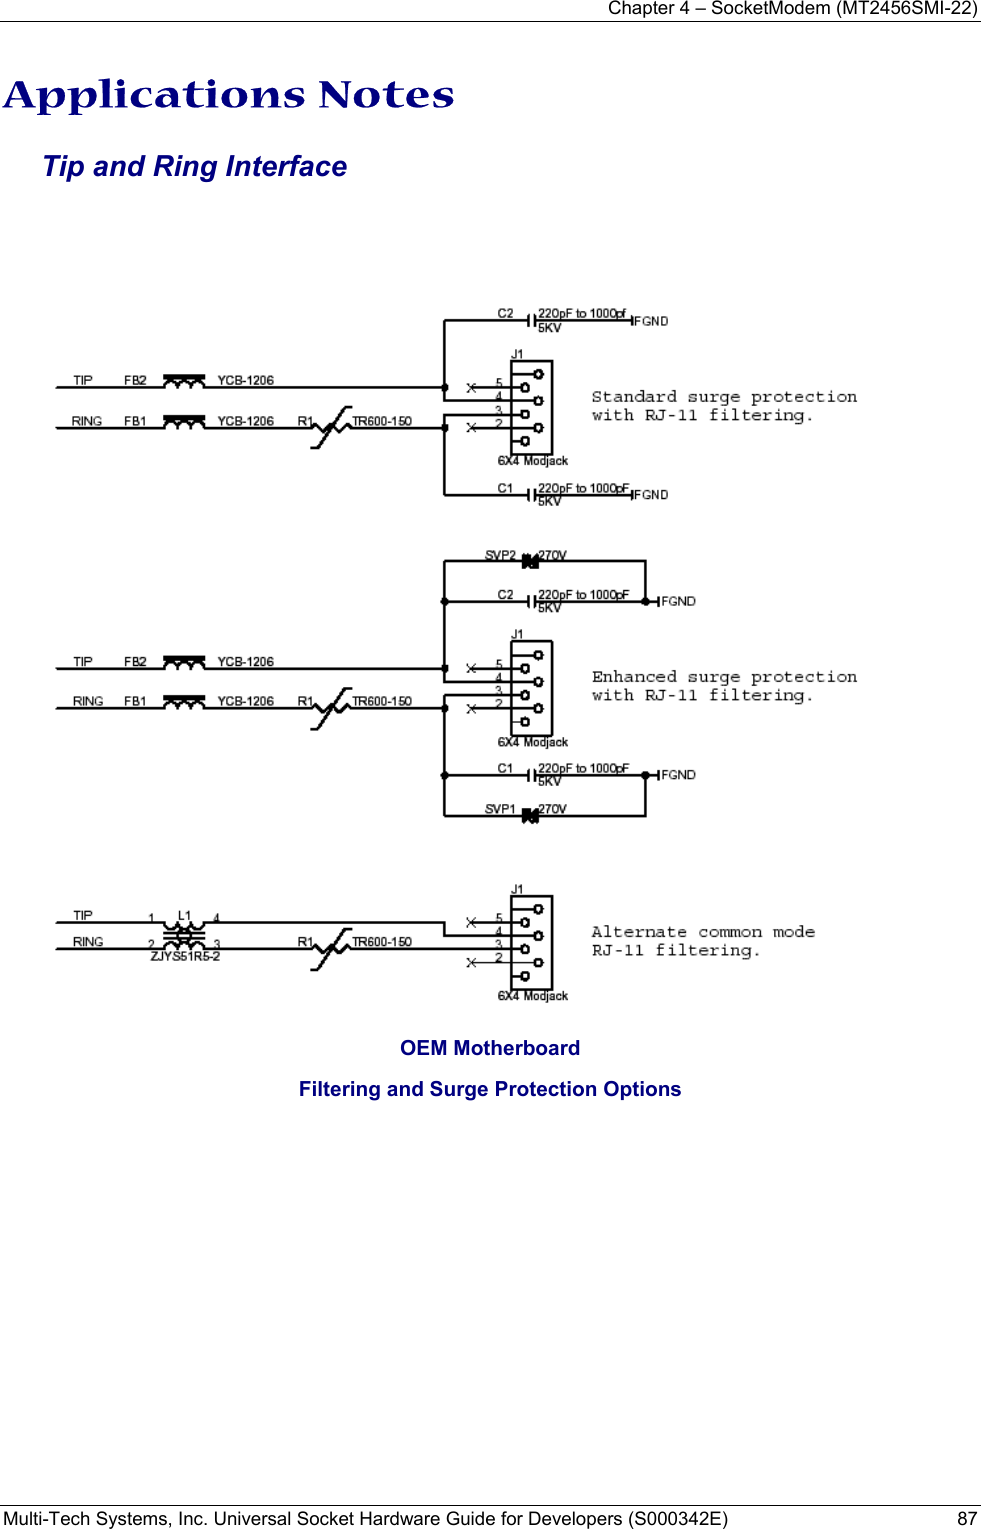 Chapter 4 – SocketModem (MT2456SMI-22) Multi-Tech Systems, Inc. Universal Socket Hardware Guide for Developers (S000342E)  87  Applications Notes Tip and Ring Interface    OEM Motherboard Filtering and Surge Protection Options     